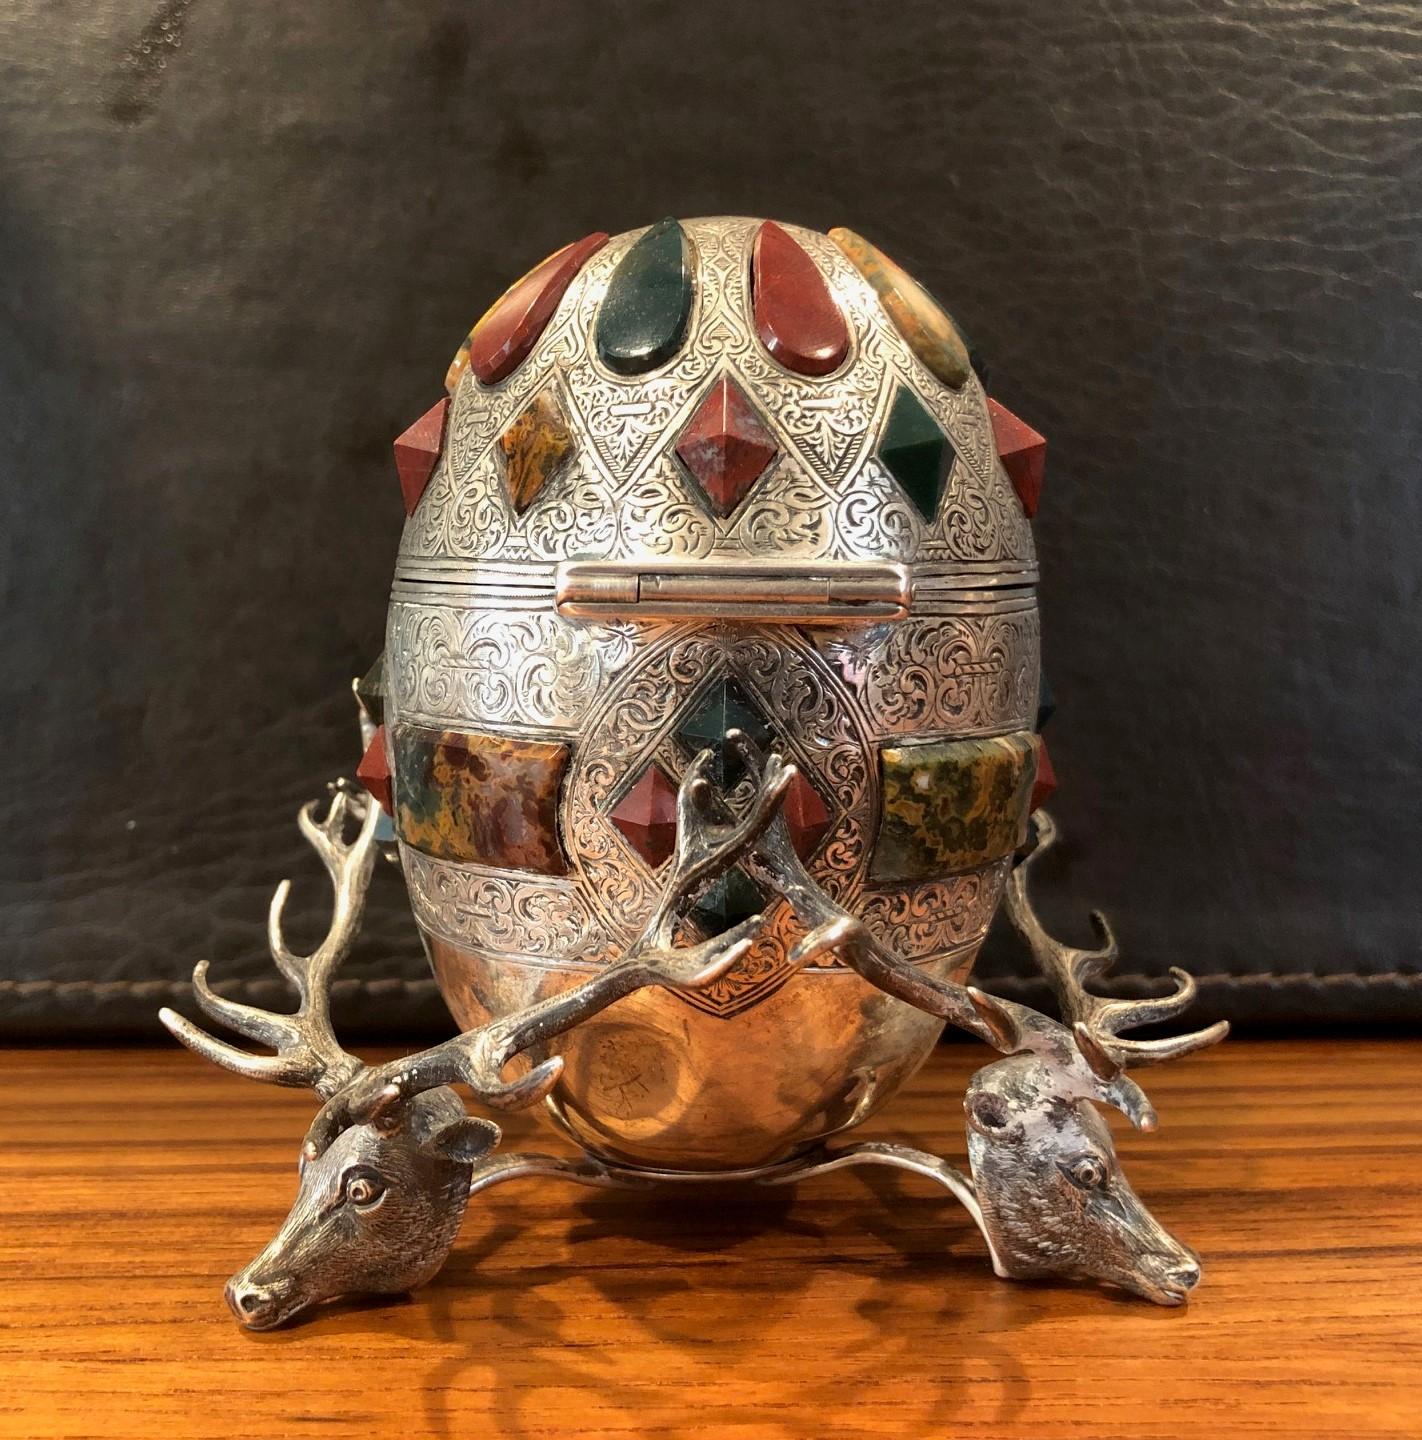 Fabulous Scottish Victorian hardstone mounted, egg form, sterling silver inkwell with cut glass liner by Mackay & Chisholm, circa 1880s. The inkwell sits on three sterling stag's heads and has forty large inset hardstones consisting of carnelian,